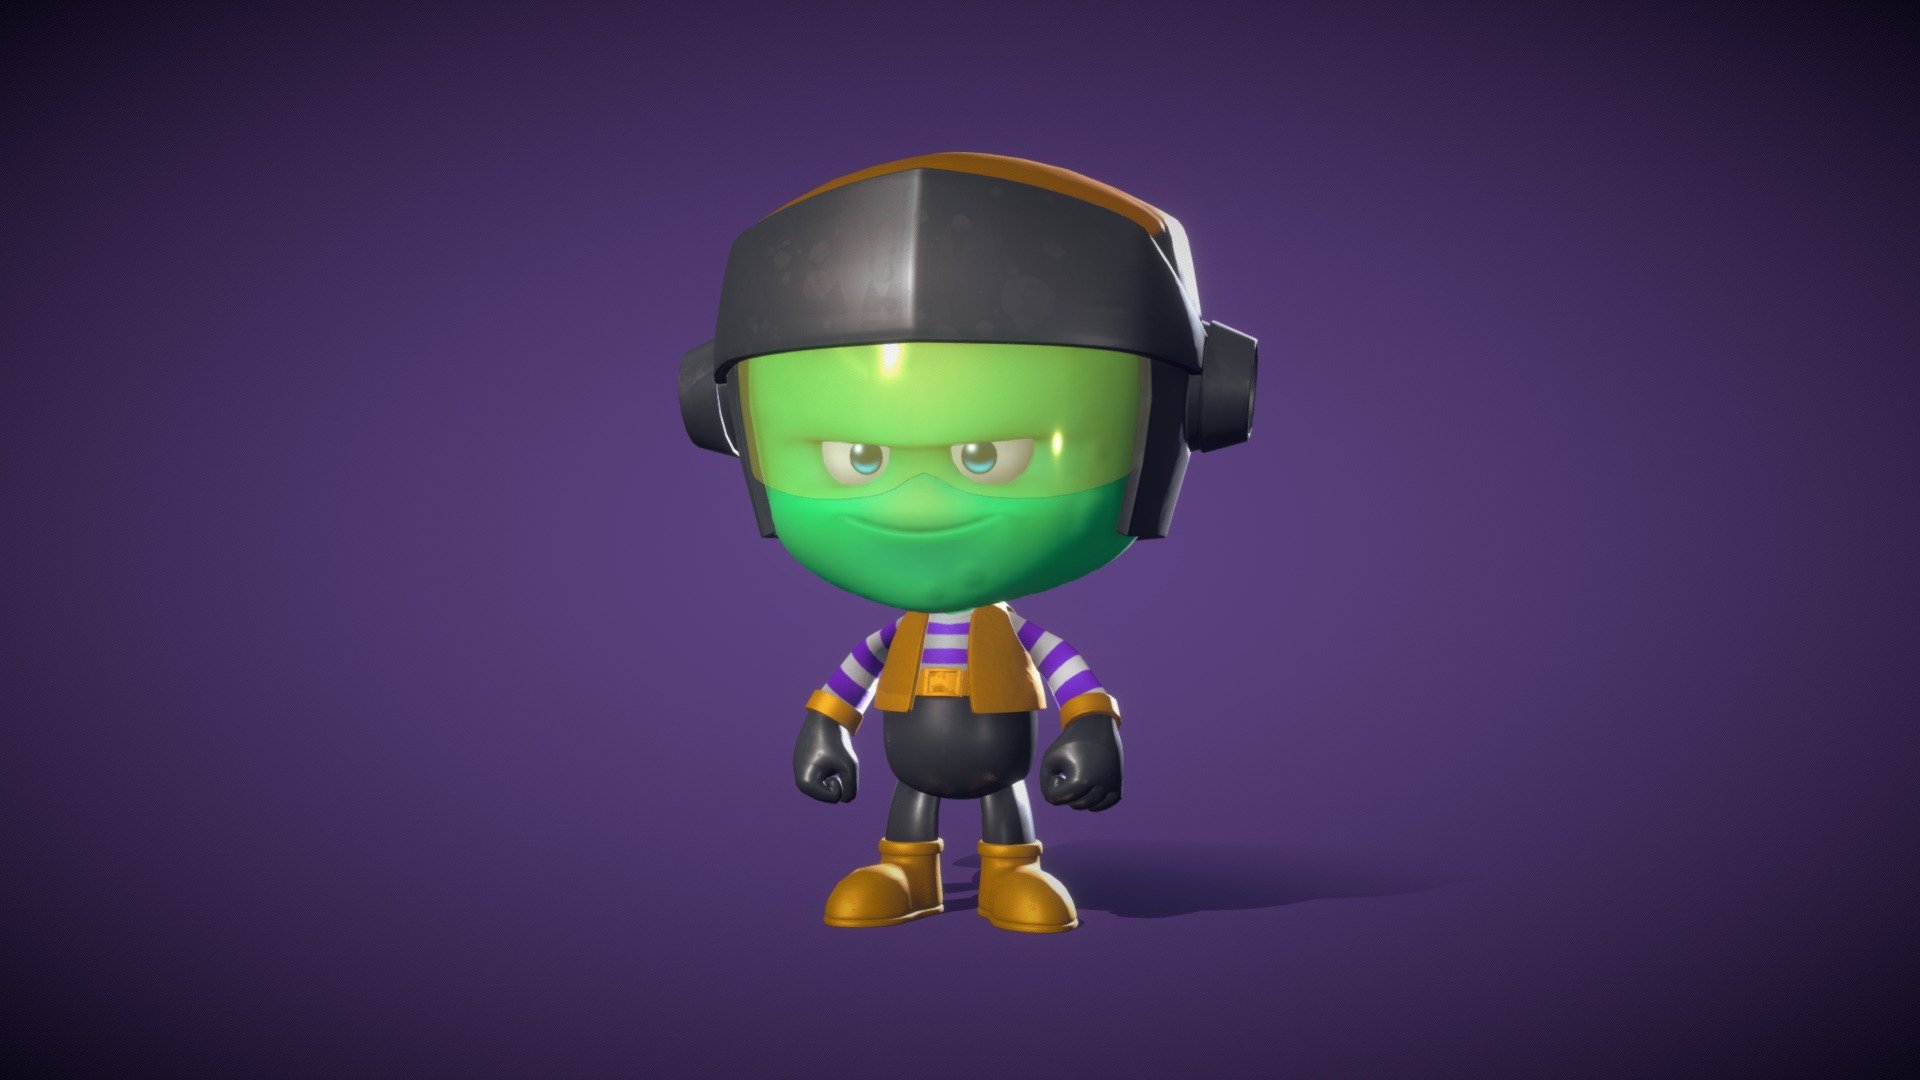 This Tiny Alien comes from a far far away galaxy, he looks like a bad boy but is a great friend.

instagram: @efren_freeze - Tiny Alien - 3D model by efrenfreeze 3d model